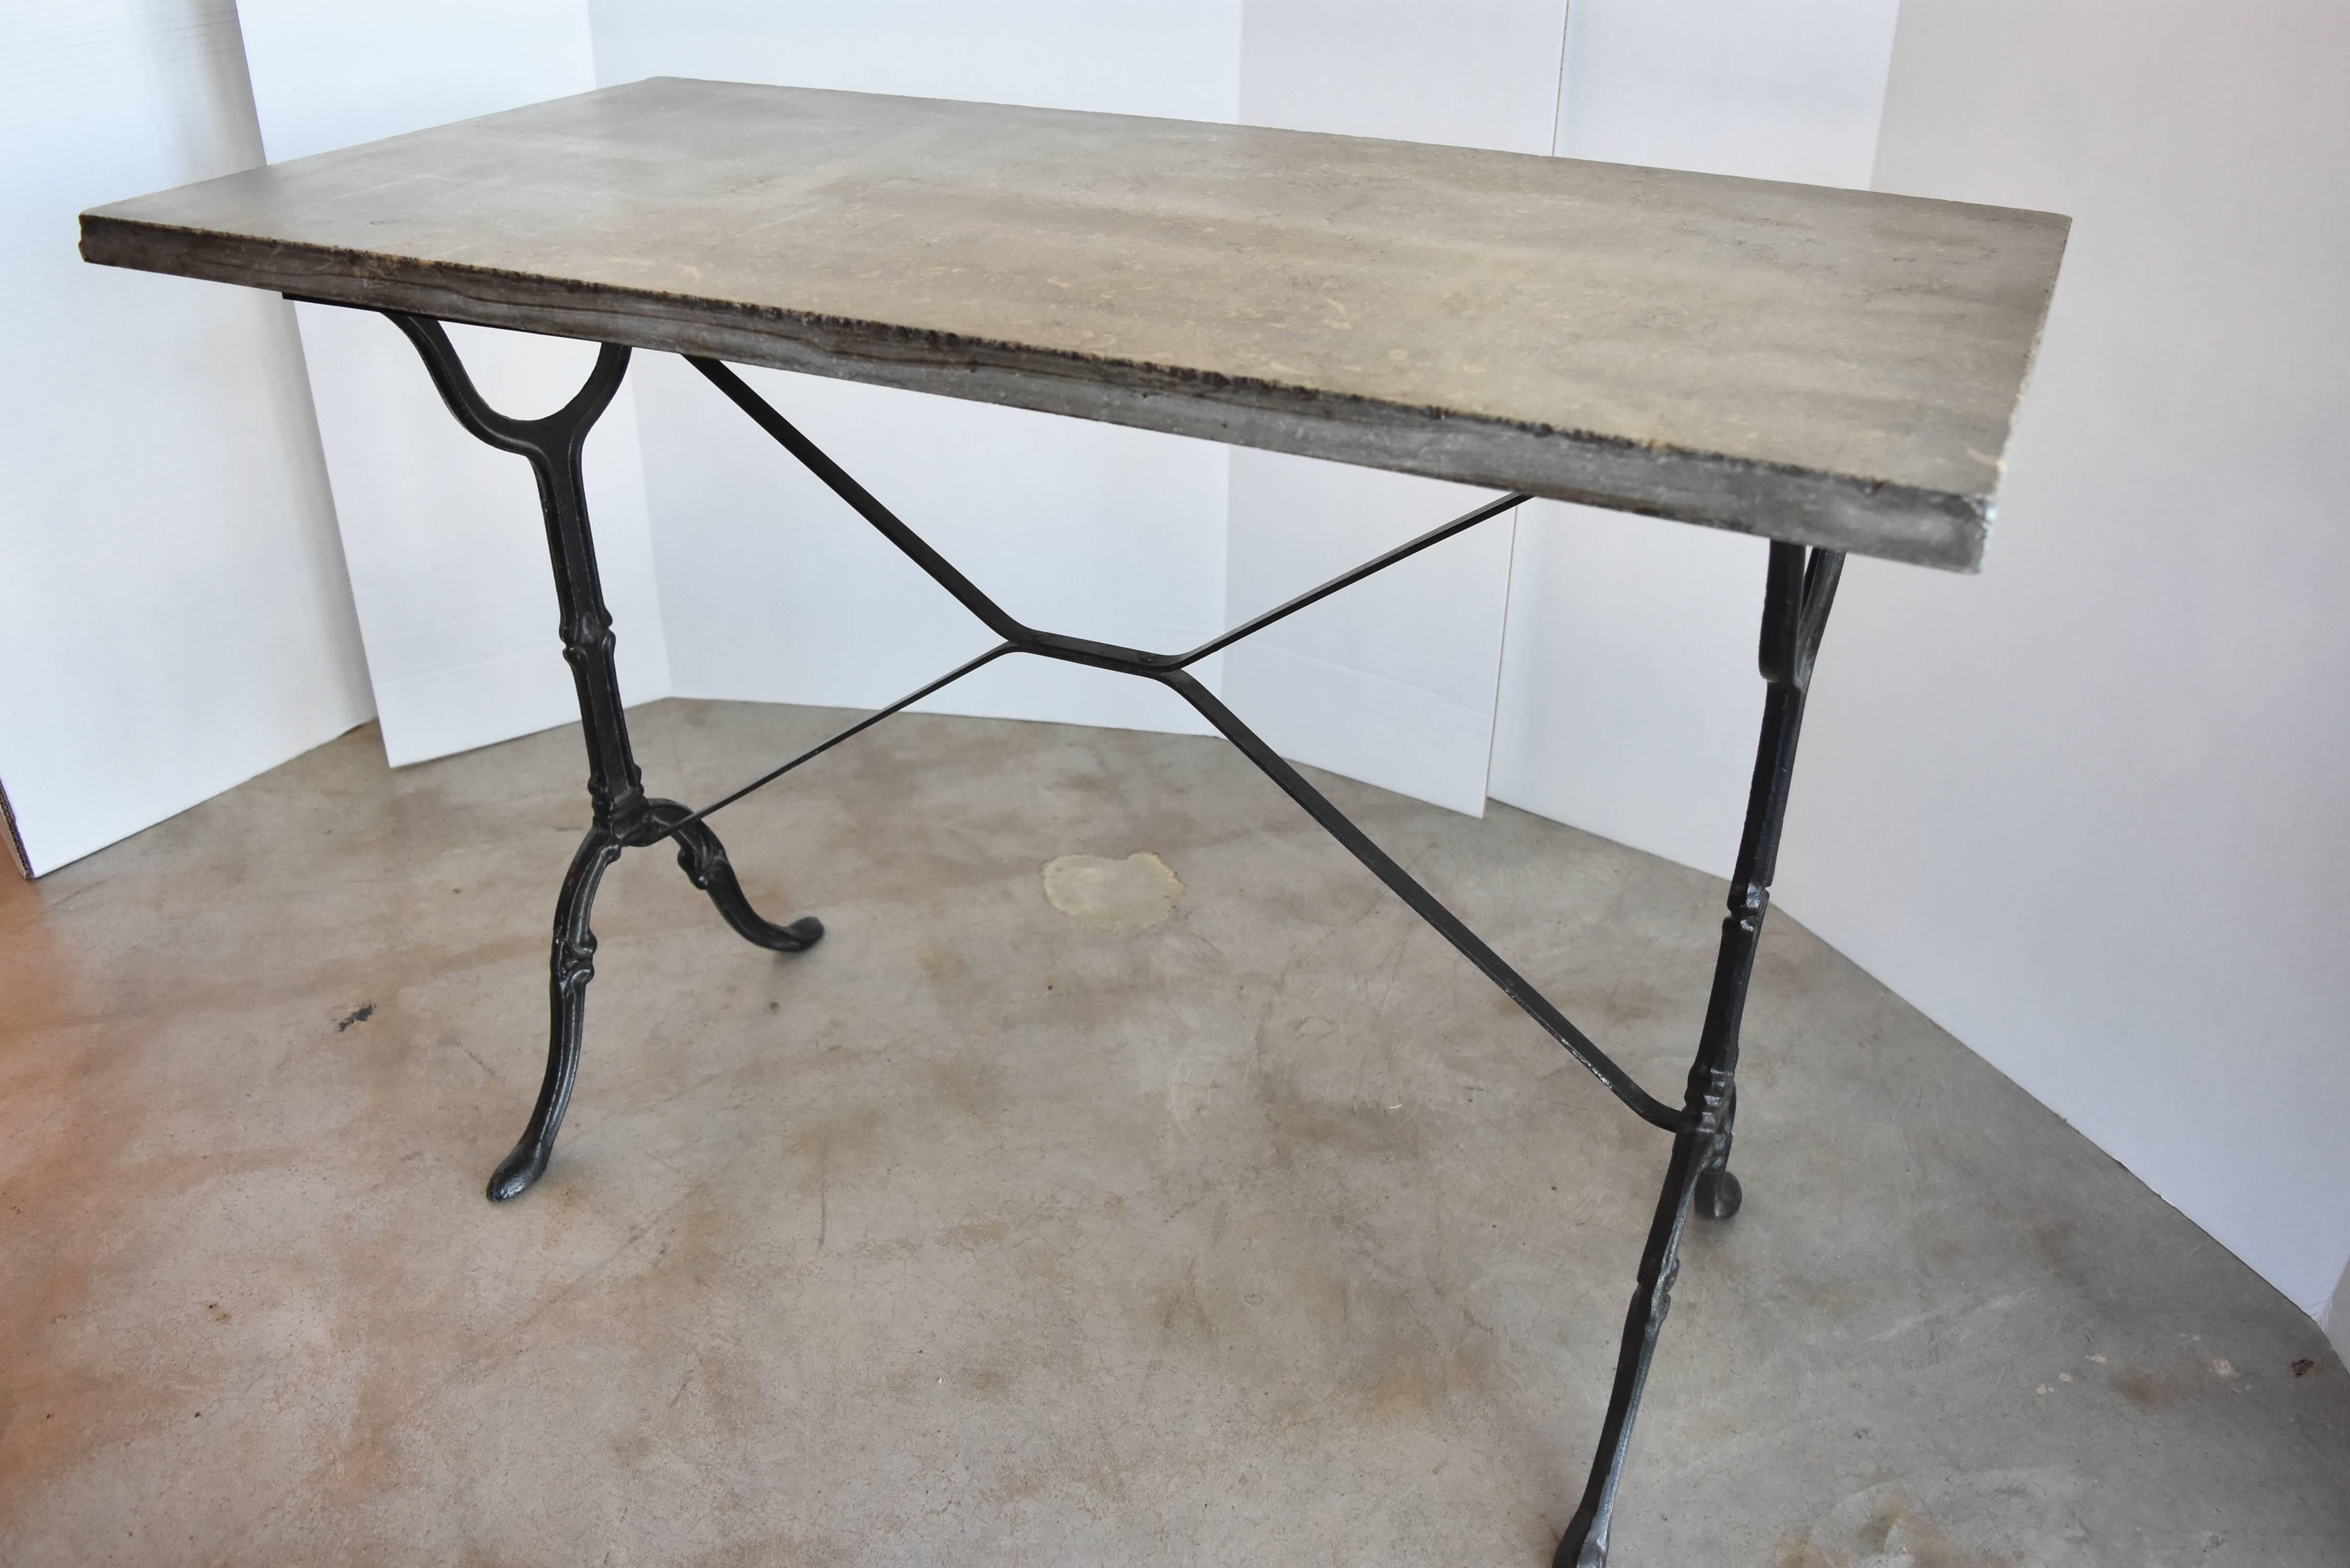 Vintage Blue Stone Marble Top Table with Metal Painted Black Base from Belgium 1